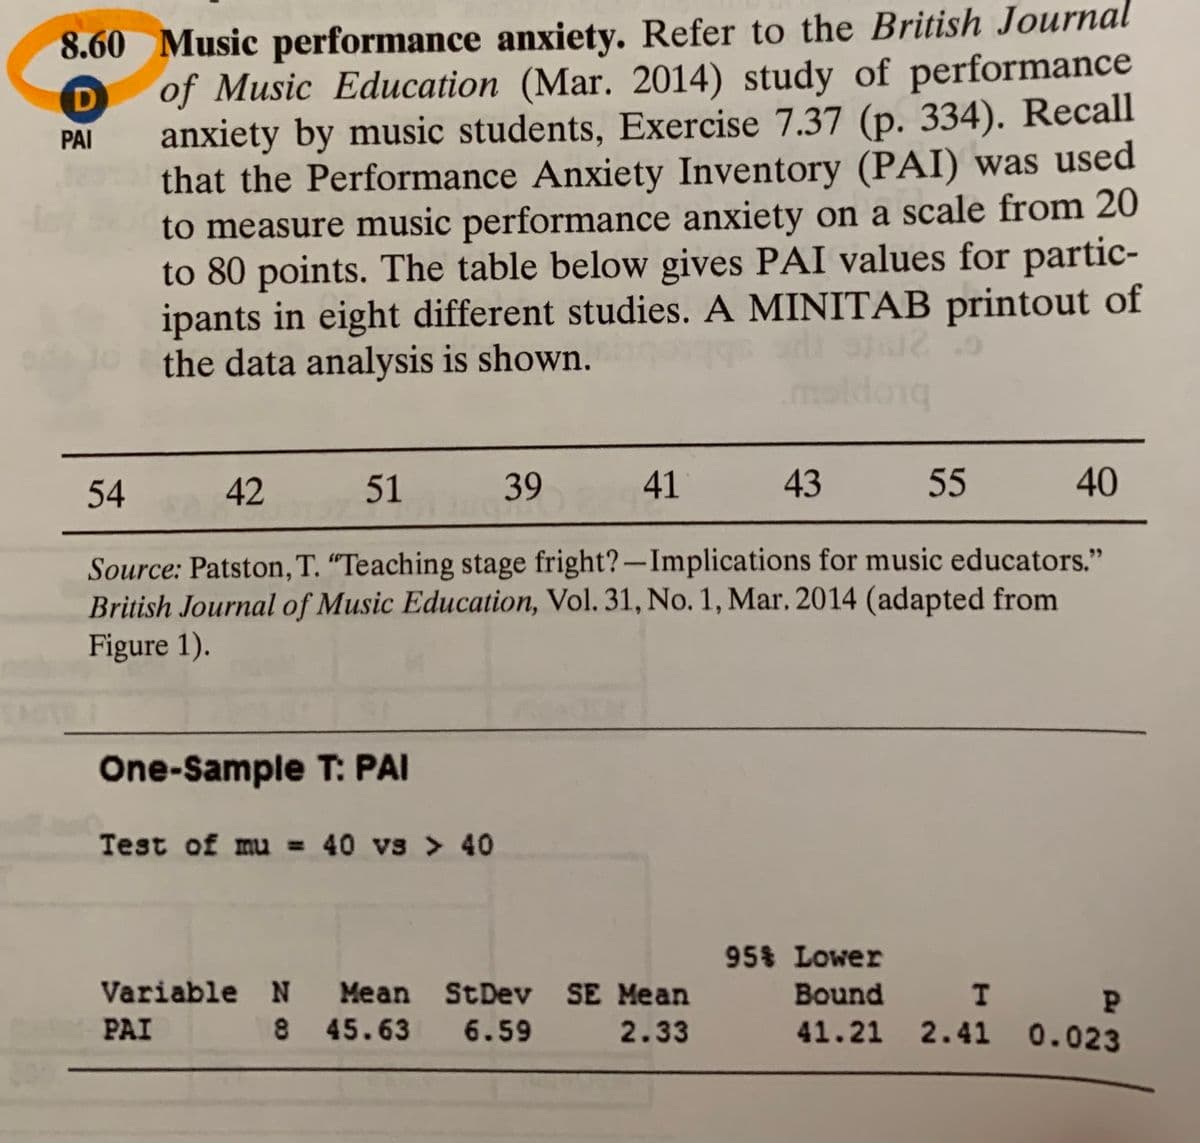 8.60 Music performance anxiety. Refer to the British Journal
of Music Education (Mar. 2014) study of performance
D
anxiety by music students, Exercise 7.37 (p. 334). Recall
that the Performance Anxiety Inventory (PAI) was used
to measure music performance anxiety on a scale from 20
to 80 points. The table below gives PAI values for partic-
ipants in eight different studies. A MINITAB printout of
the data analysis is shown.
PAI
maldong
54
42
51
39
41
43
55 40
Source: Patston, T. “Teaching stage fright?-Implications for music educators."
British Journal of Music Education, Vol. 31, No. 1, Mar. 2014 (adapted from
Figure 1).
One-Sample T: PAI
Test of mu = 40 vs > 40
95% Lower
Bound I P
41.21 2.41 0.023
Variable N Mean StDev SE Mean
PAI
8 45.63 6.59
2.33
